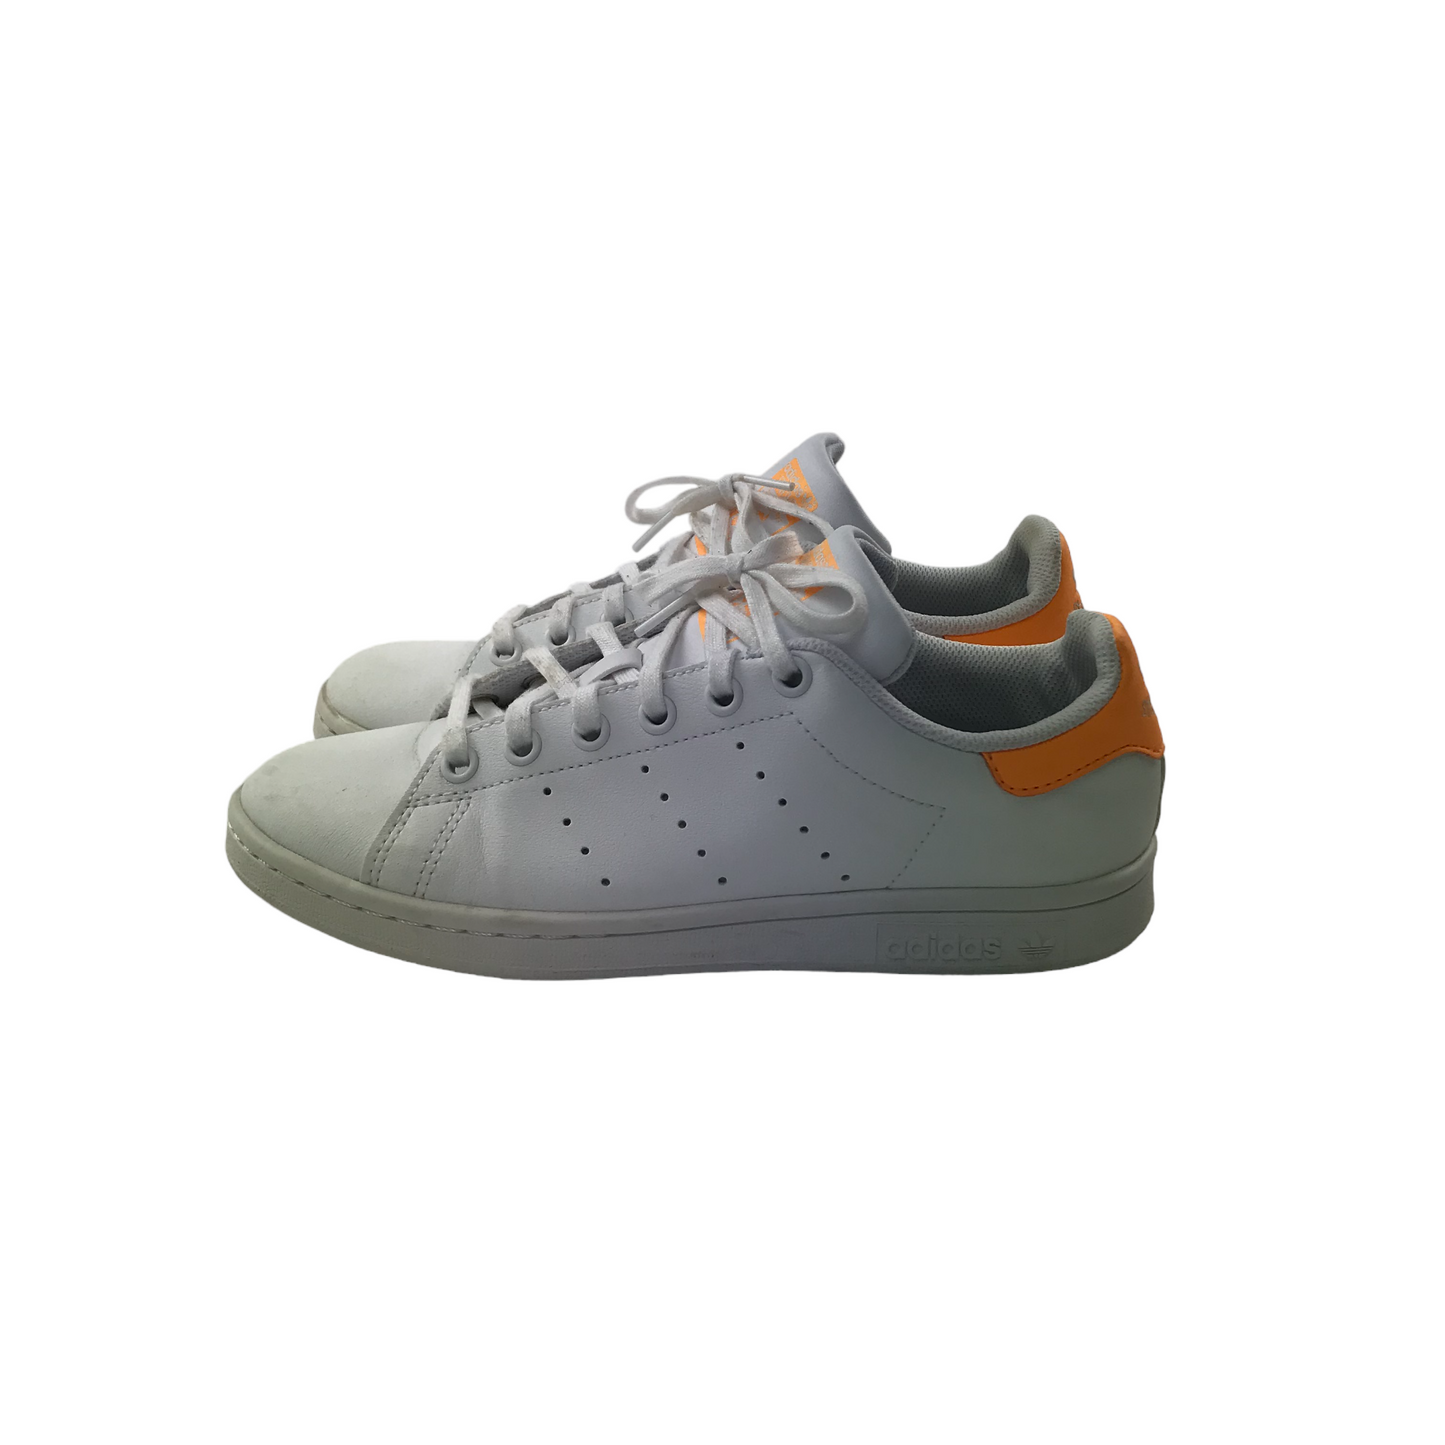 Adidas Stan Smith White and Orange Trainers Shoe Size 4.5